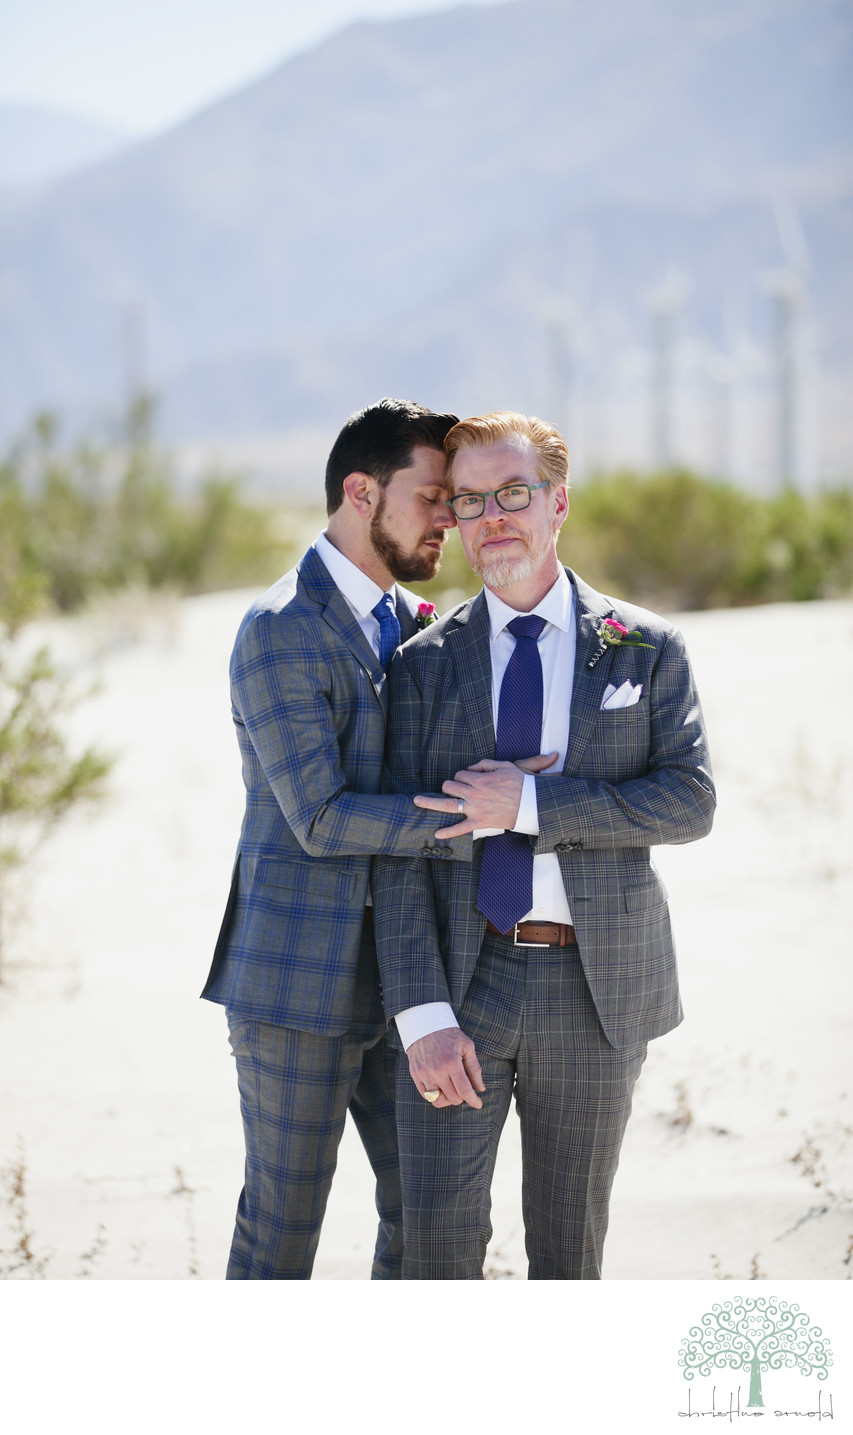 Intimate moments LGBTQ nuptials Palm Springs